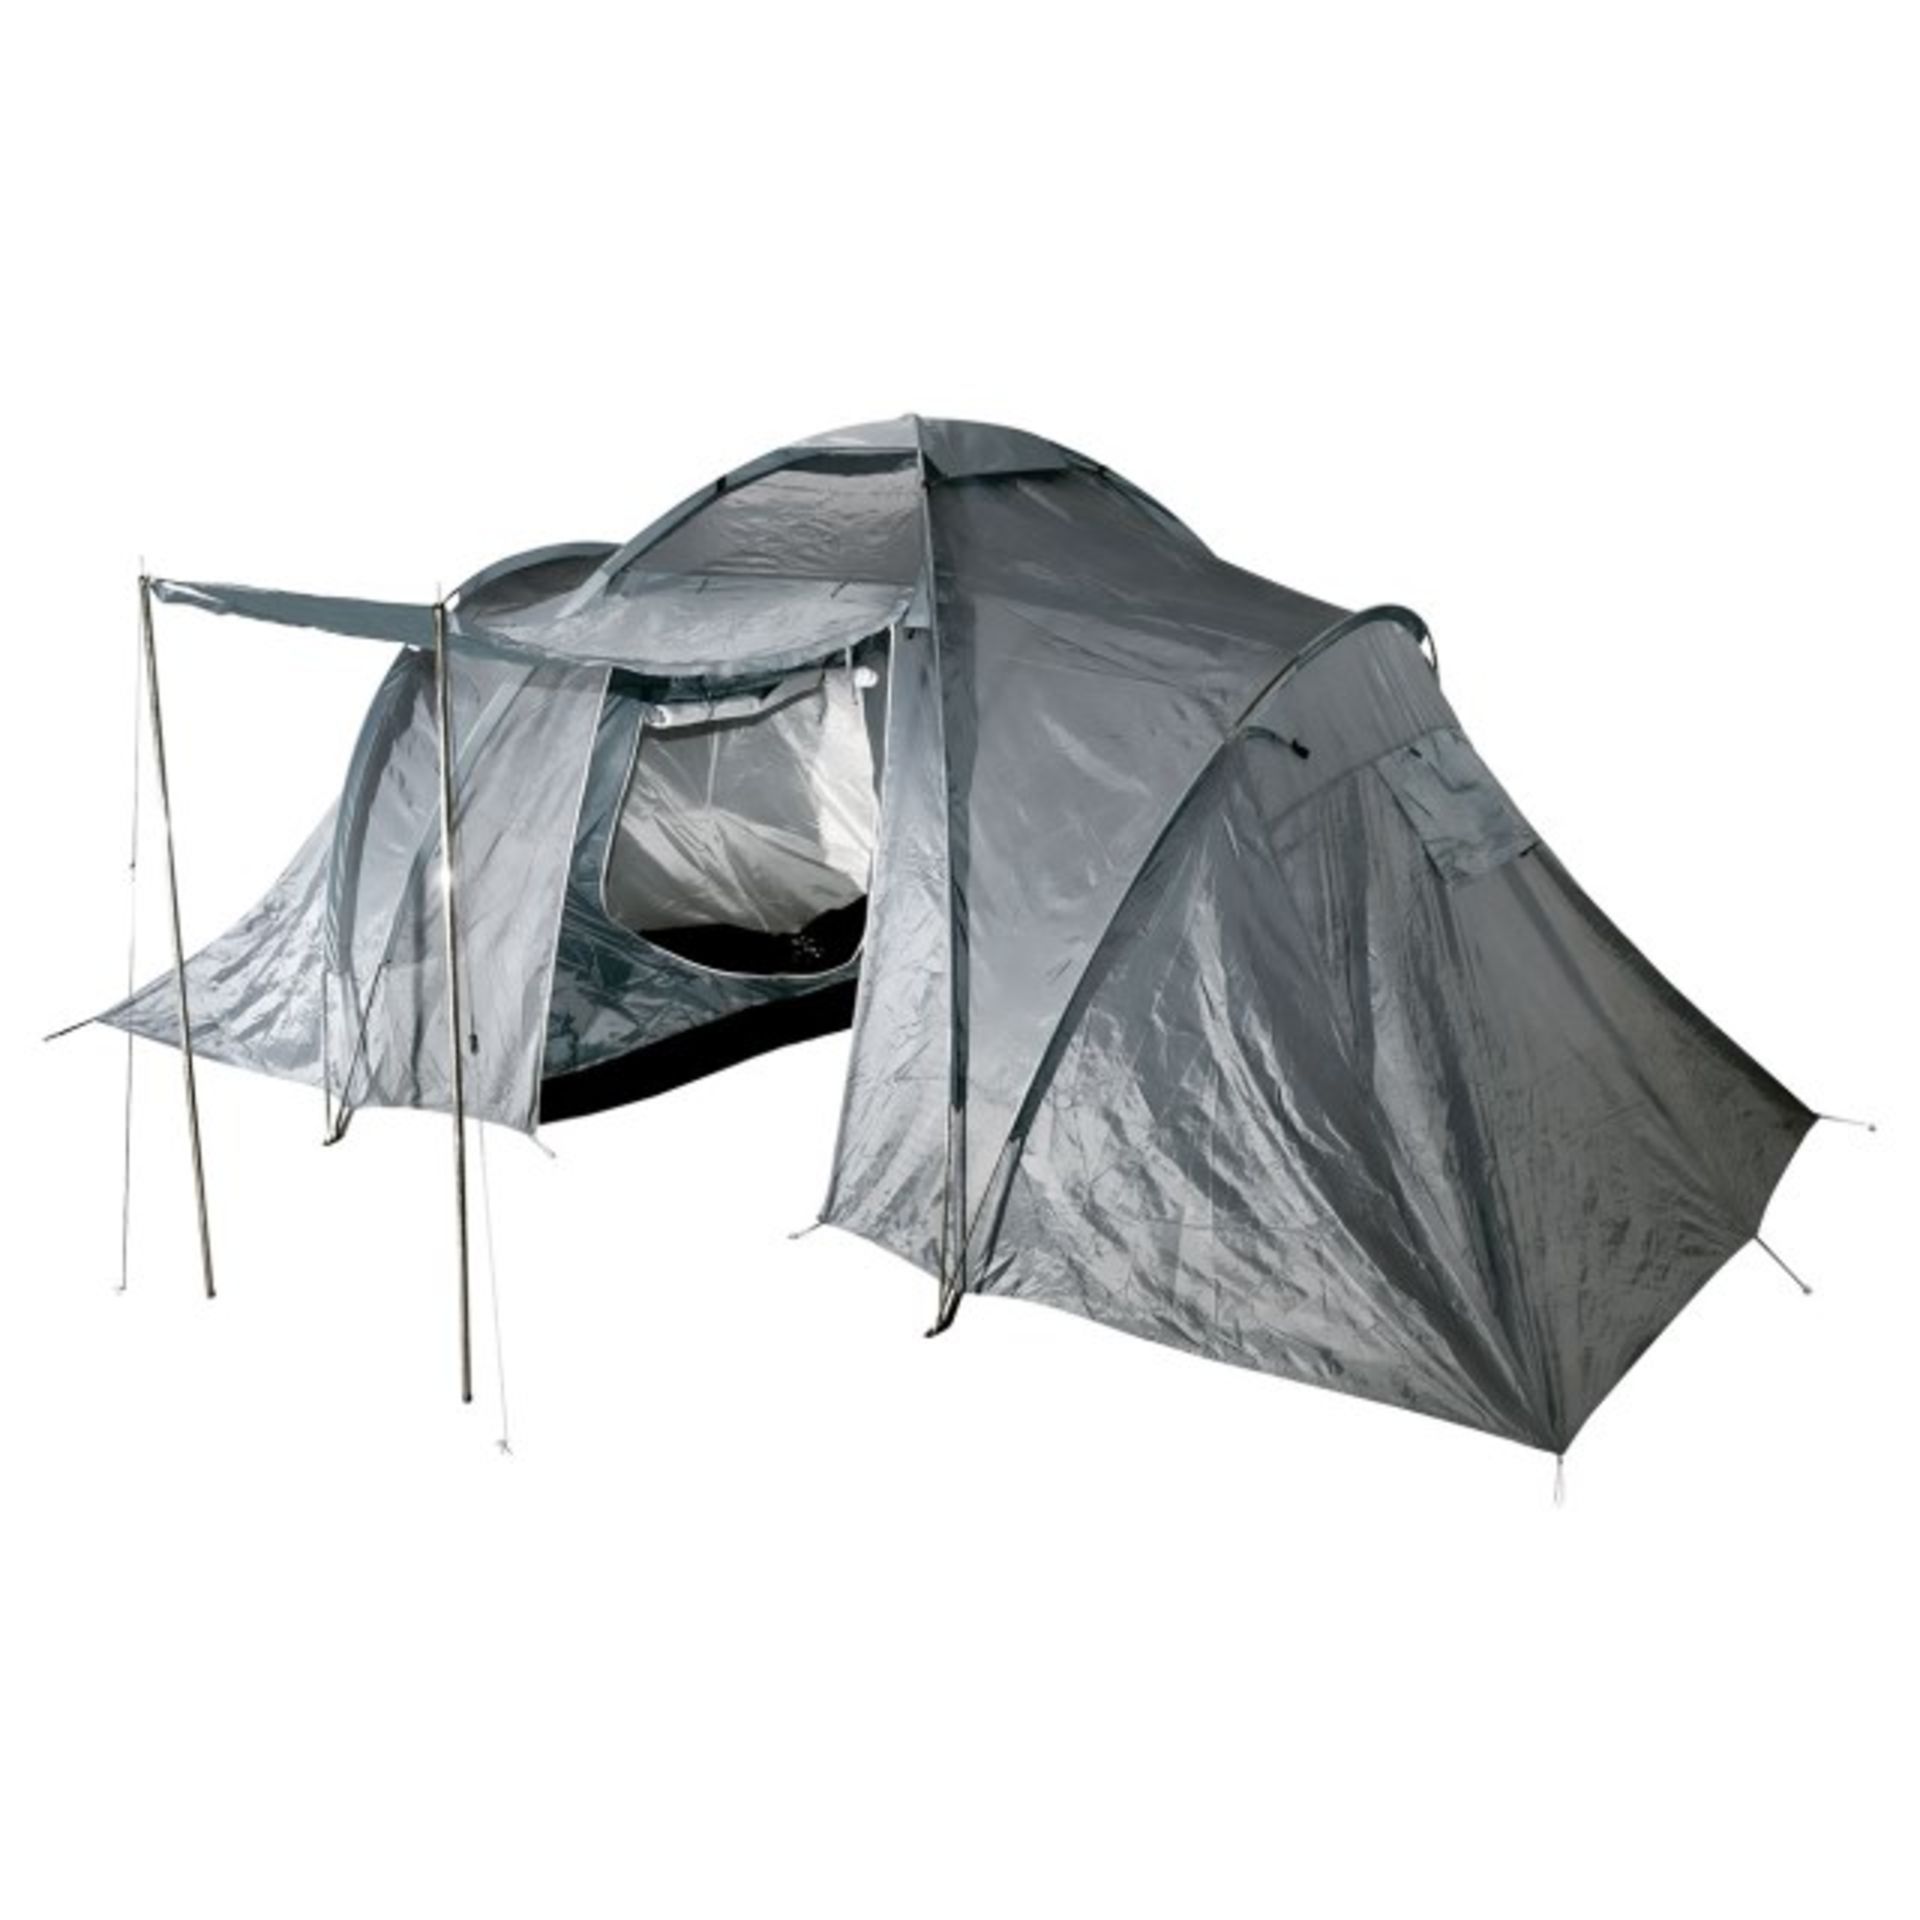 V Brand New Redcliffs Longwood Four Man Three Room Family Tent With Canopy - Colour May Vary - Image 2 of 3